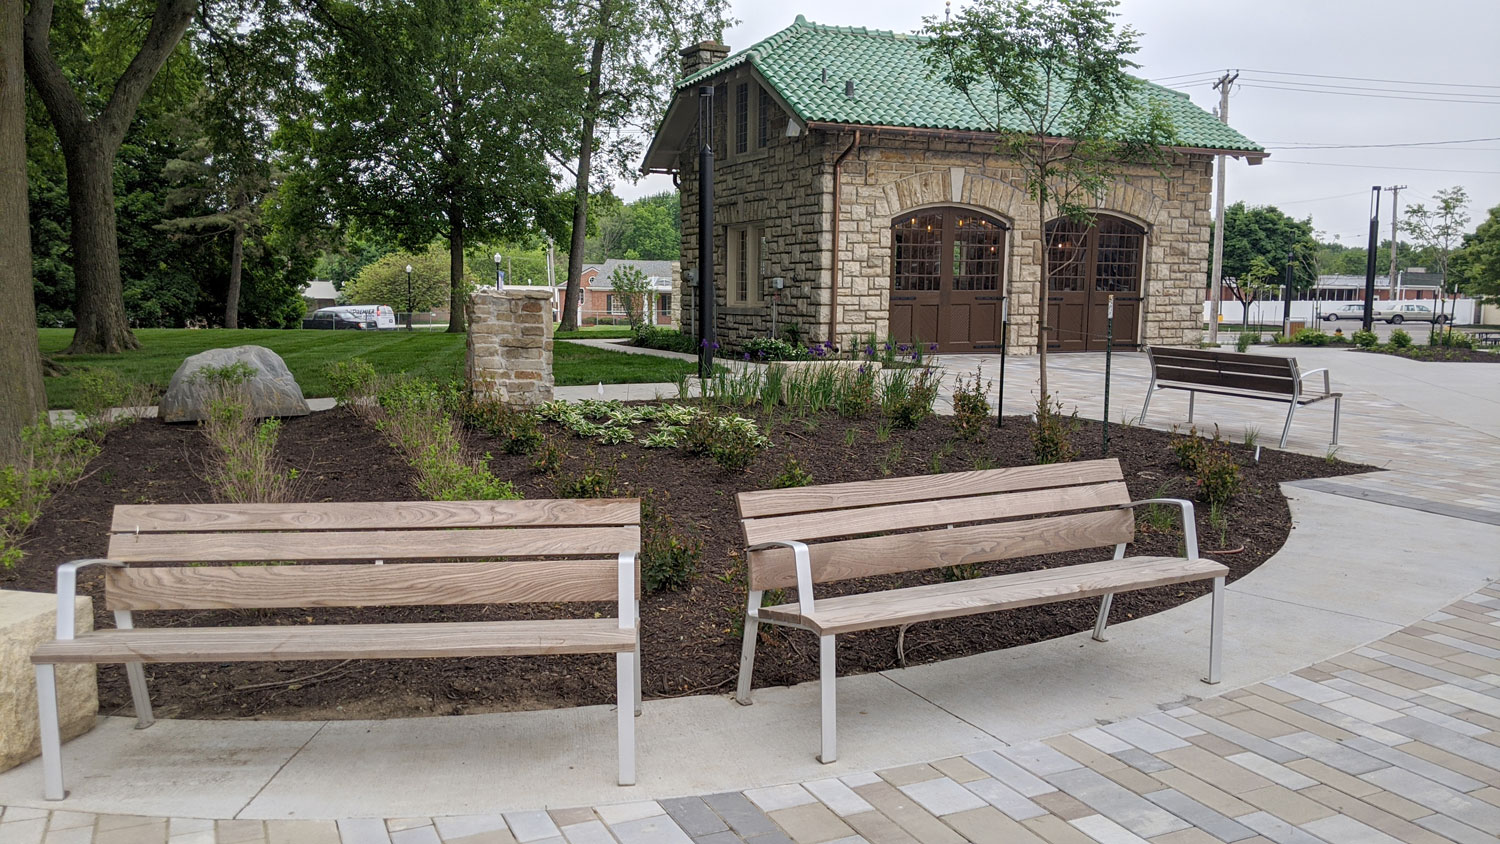 This is an image of downtown overland park thompson park bench carriage house web